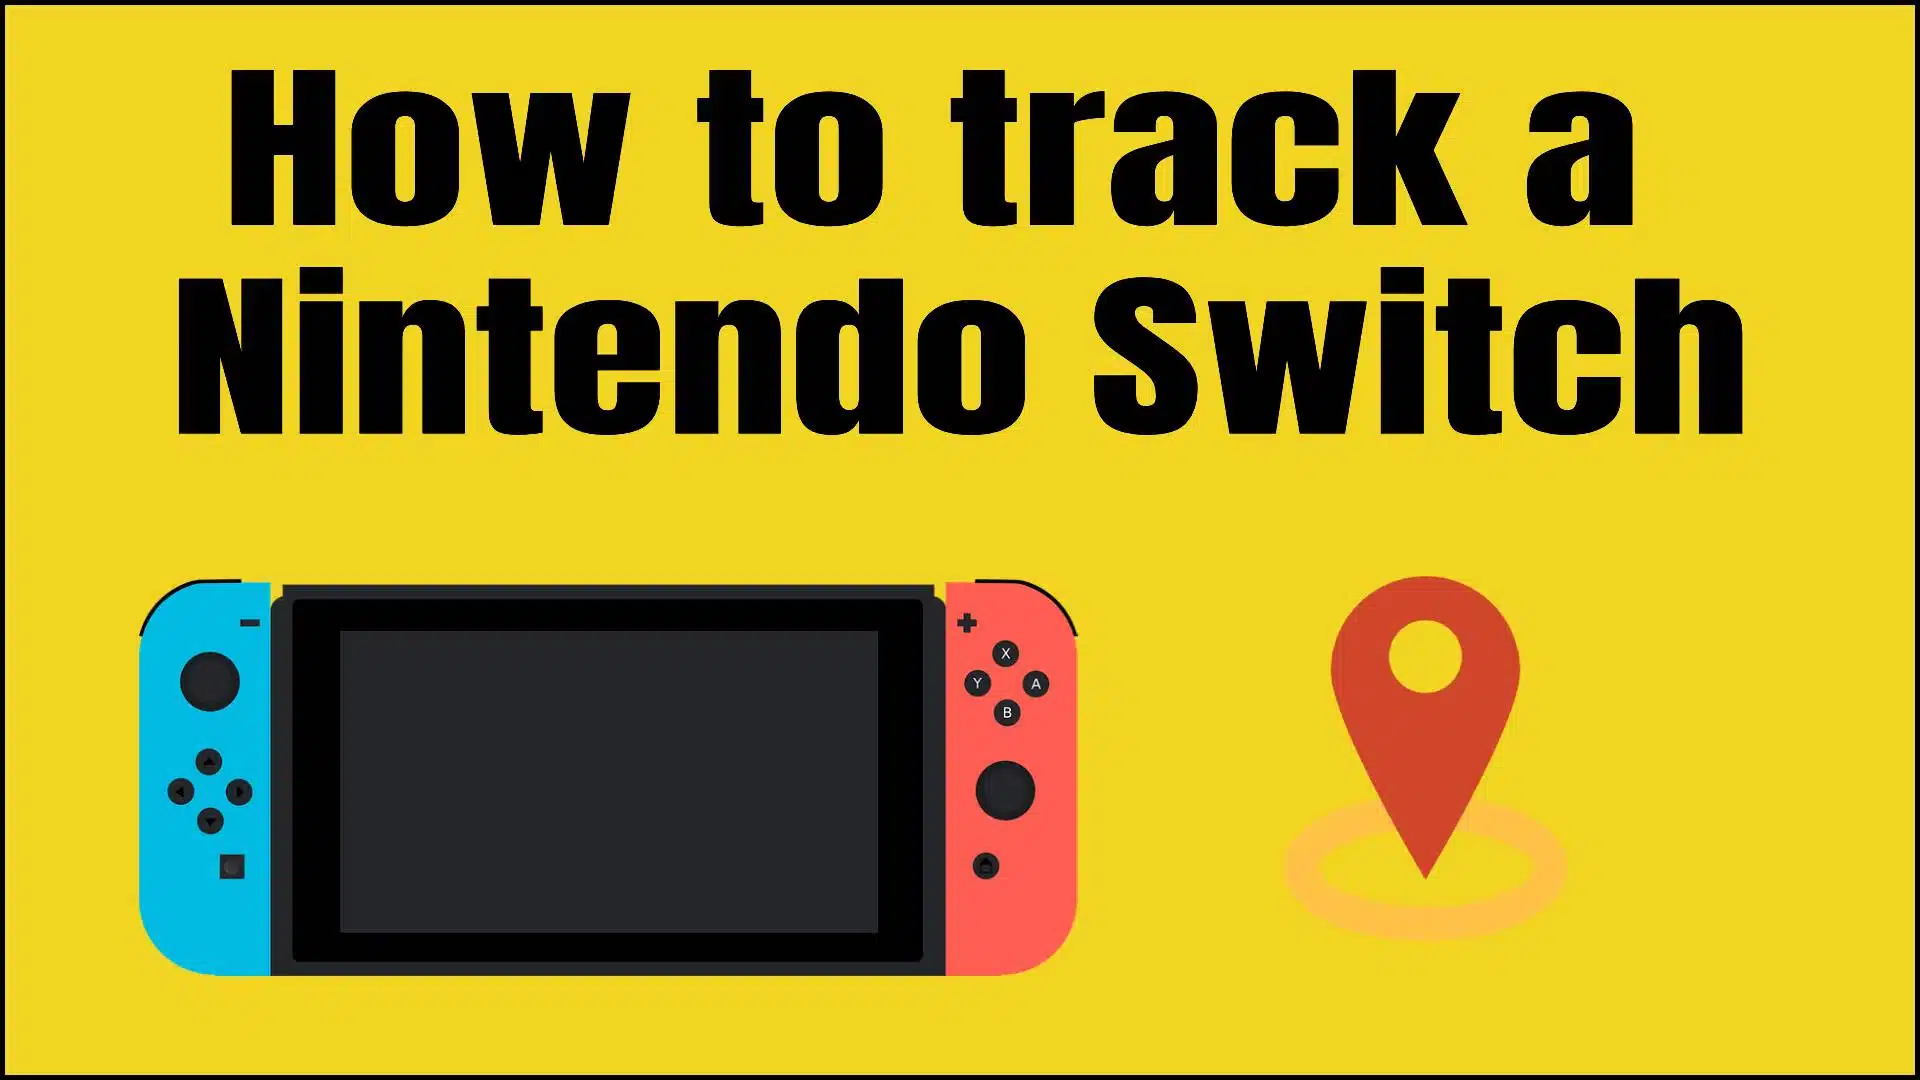 How to track a Nintendo Switch